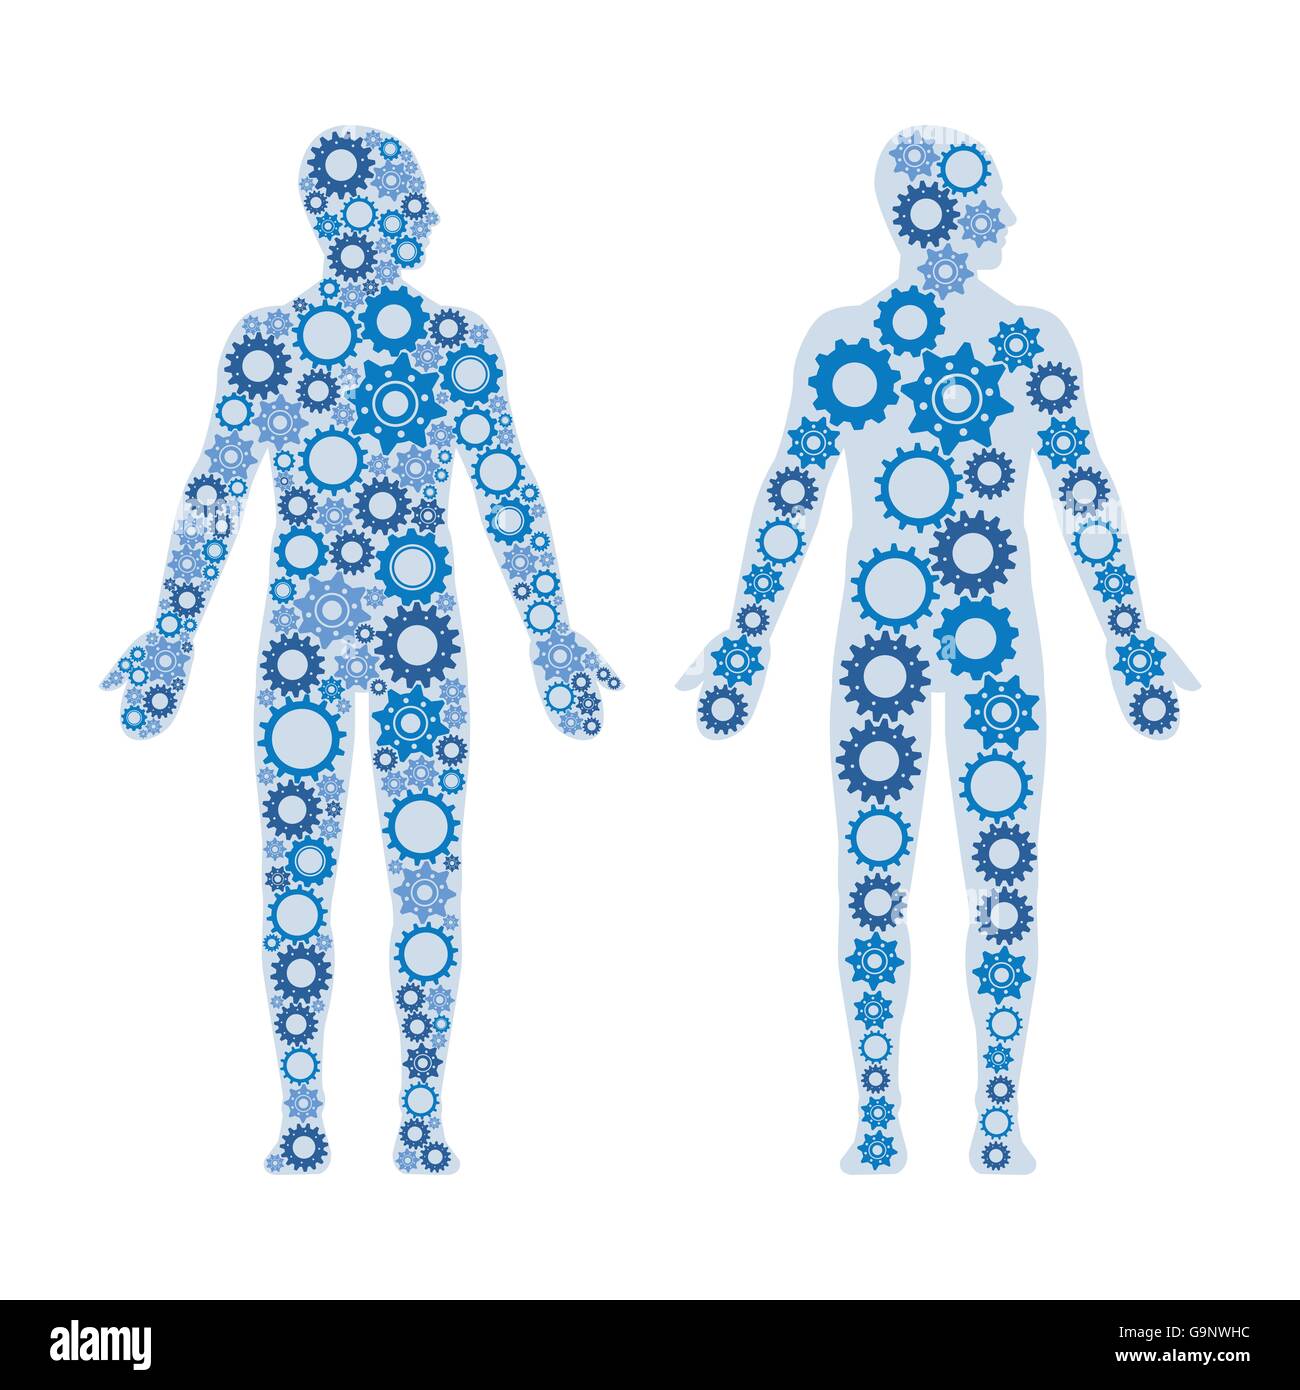 Human male bodies composed of gears, healthy lifestyle and anatomy concept Stock Vector